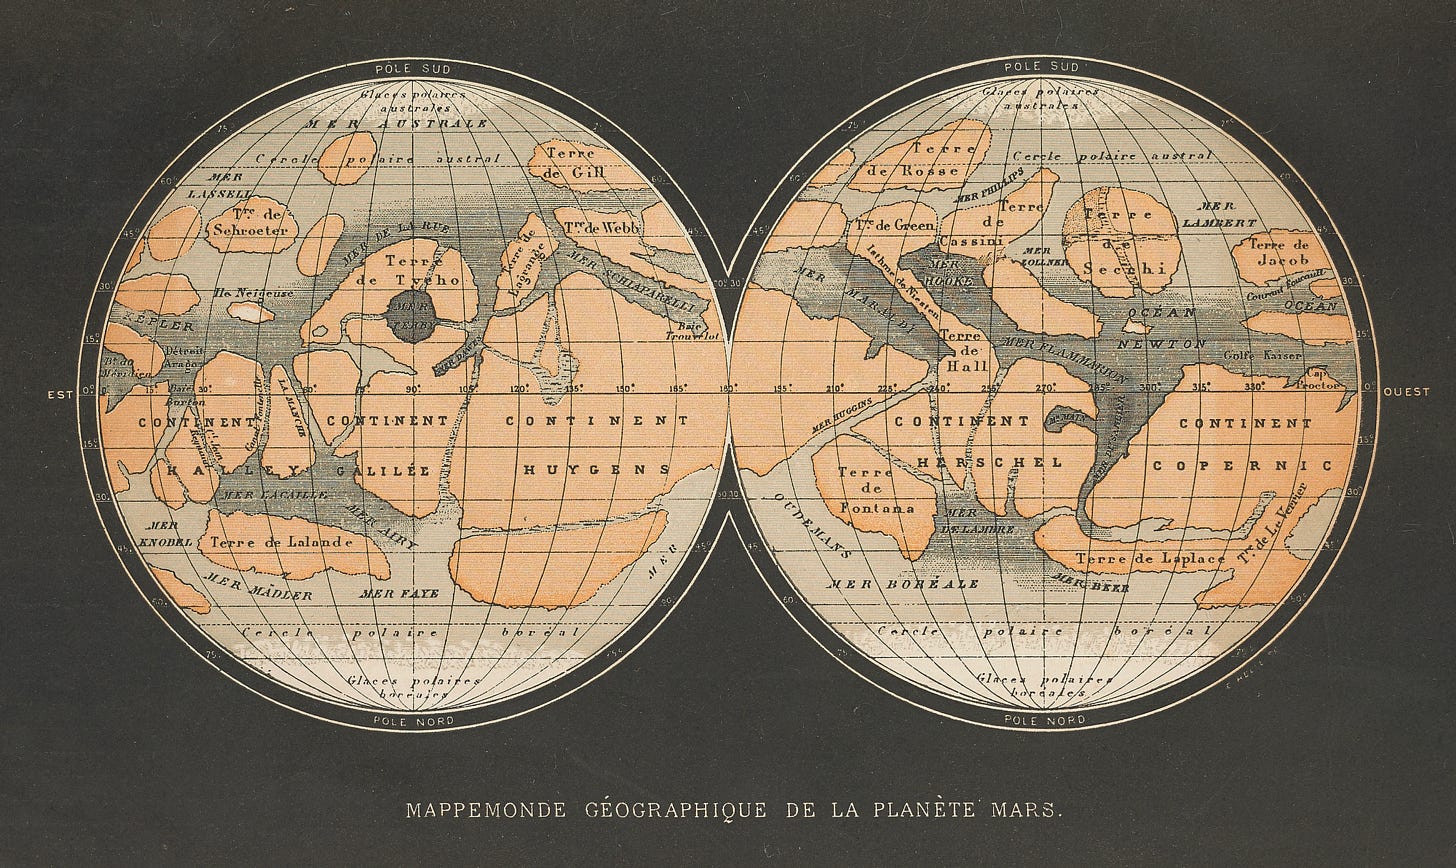 French astronomer Camille Flammarion’s 1884 map of Mars bears a resemblance to Proctor’s 1867 map, but it is also a clear predecessor to later maps by Giovanni Schiaparelli and Percival Lowell that led to speculation about the existence of artificial canals on Mars. Flammarion was a proponent of the idea that Mars was habitable. (Source: Les Terres du Ciel, by Camille Flammarion, 1884)